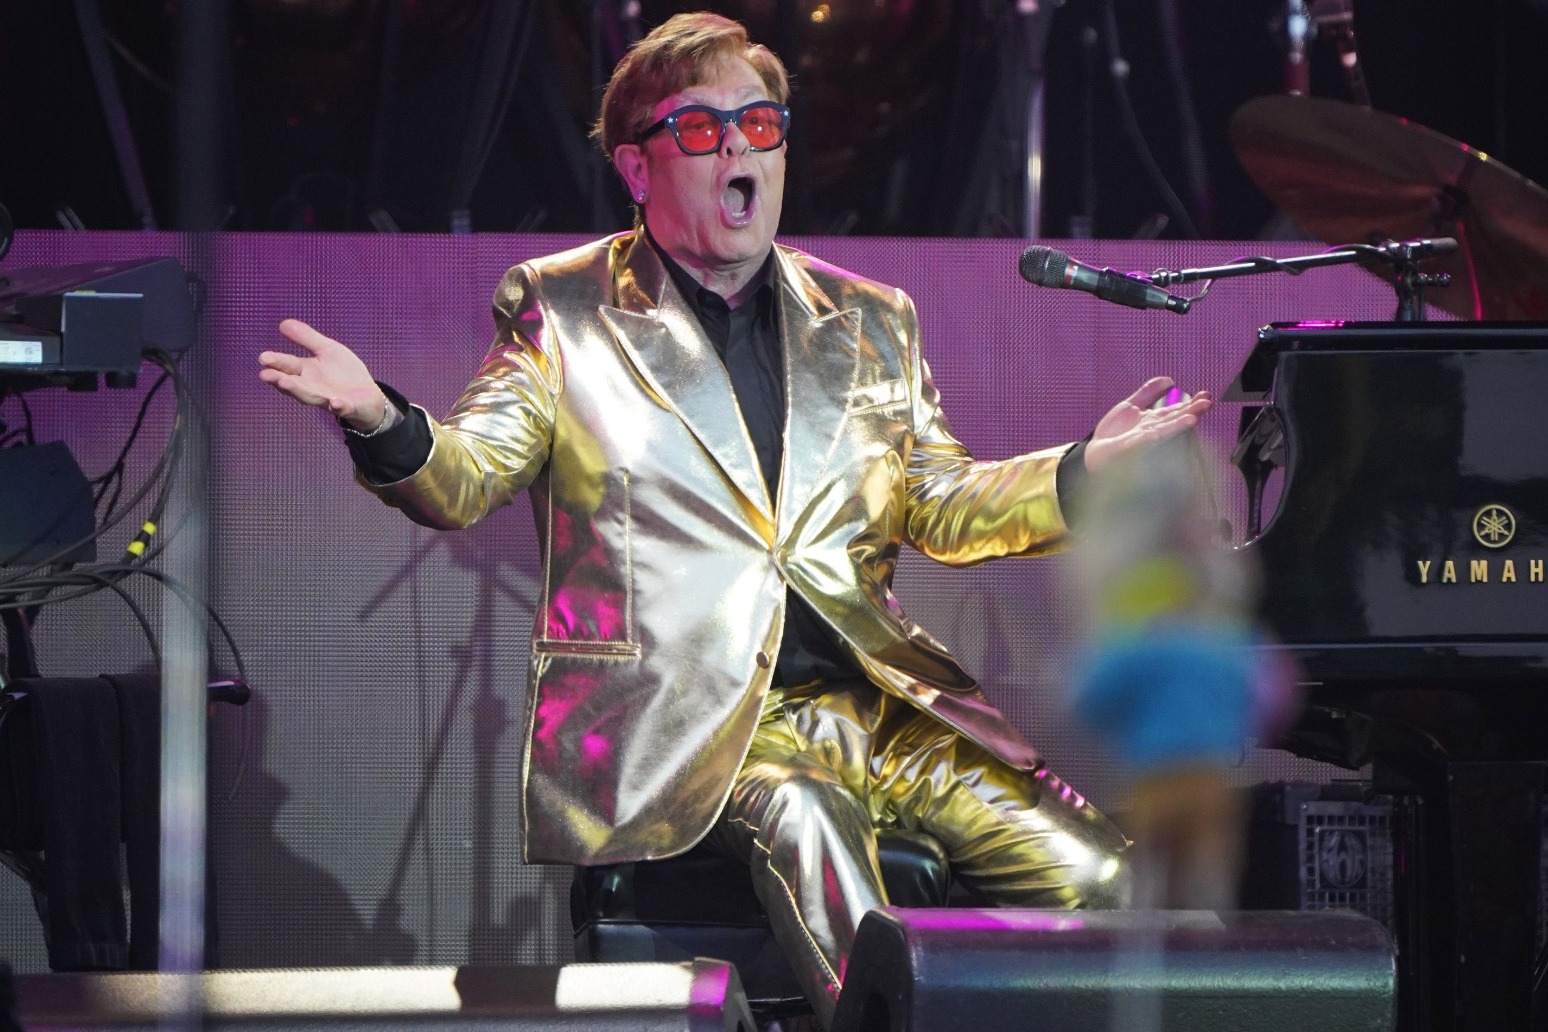 Elton John sells Gucci jackets and Versace shirts for Aids charity 